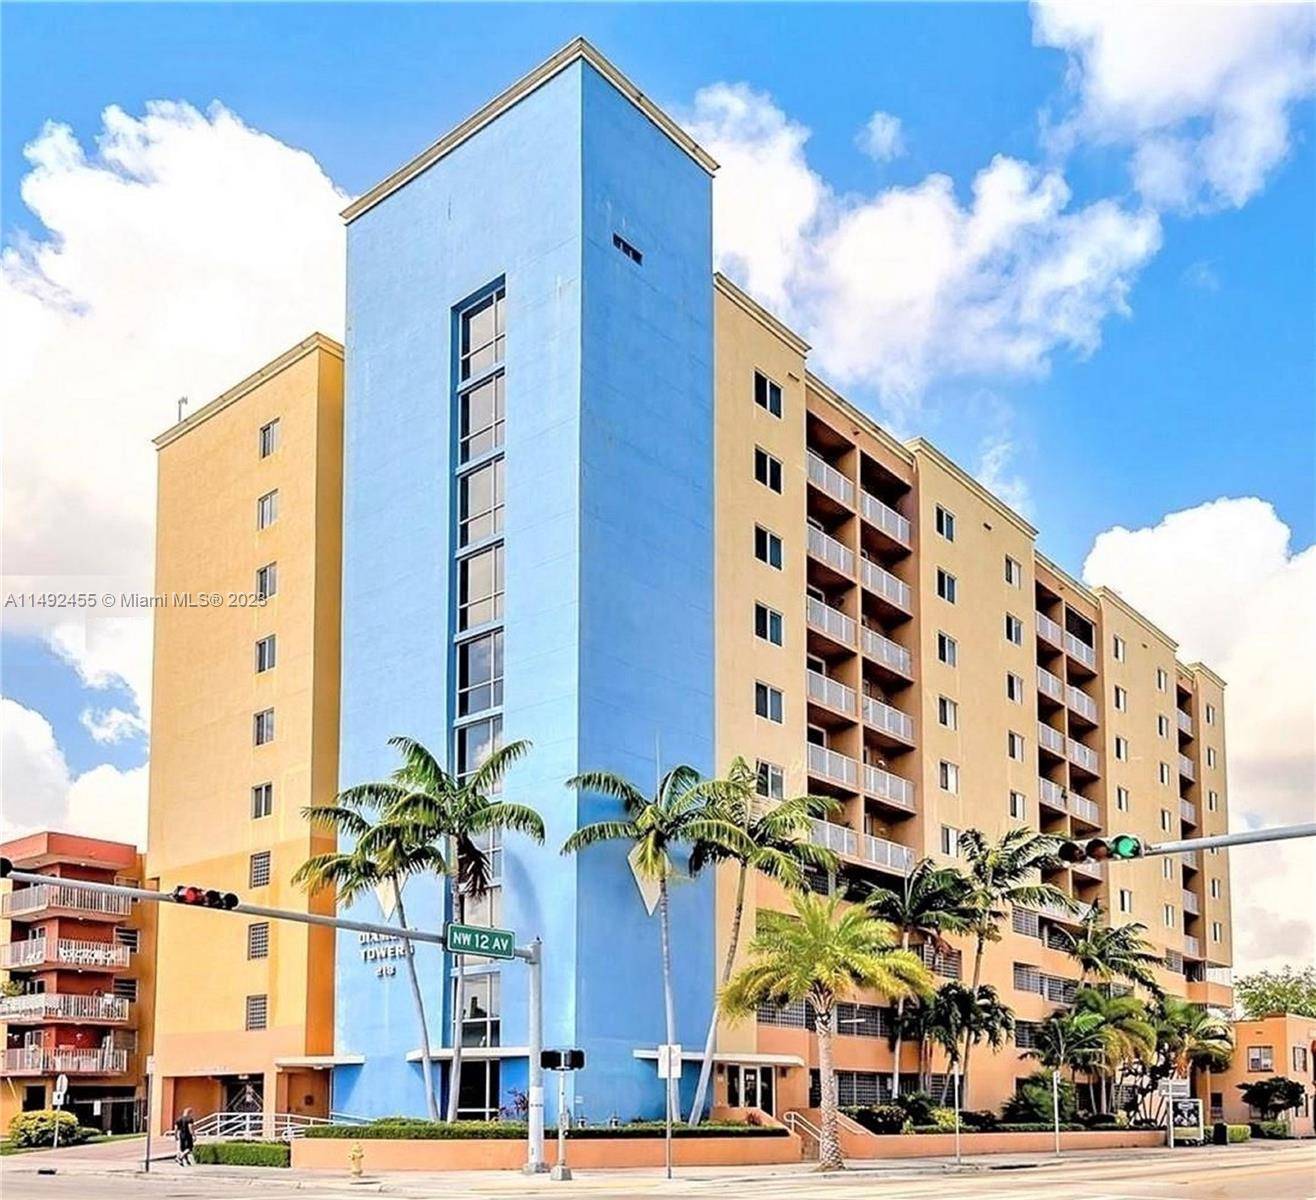 Fabulous 3 3 condo for rent near downtown Miami and the UM Jackson Medical campus without the high prices.